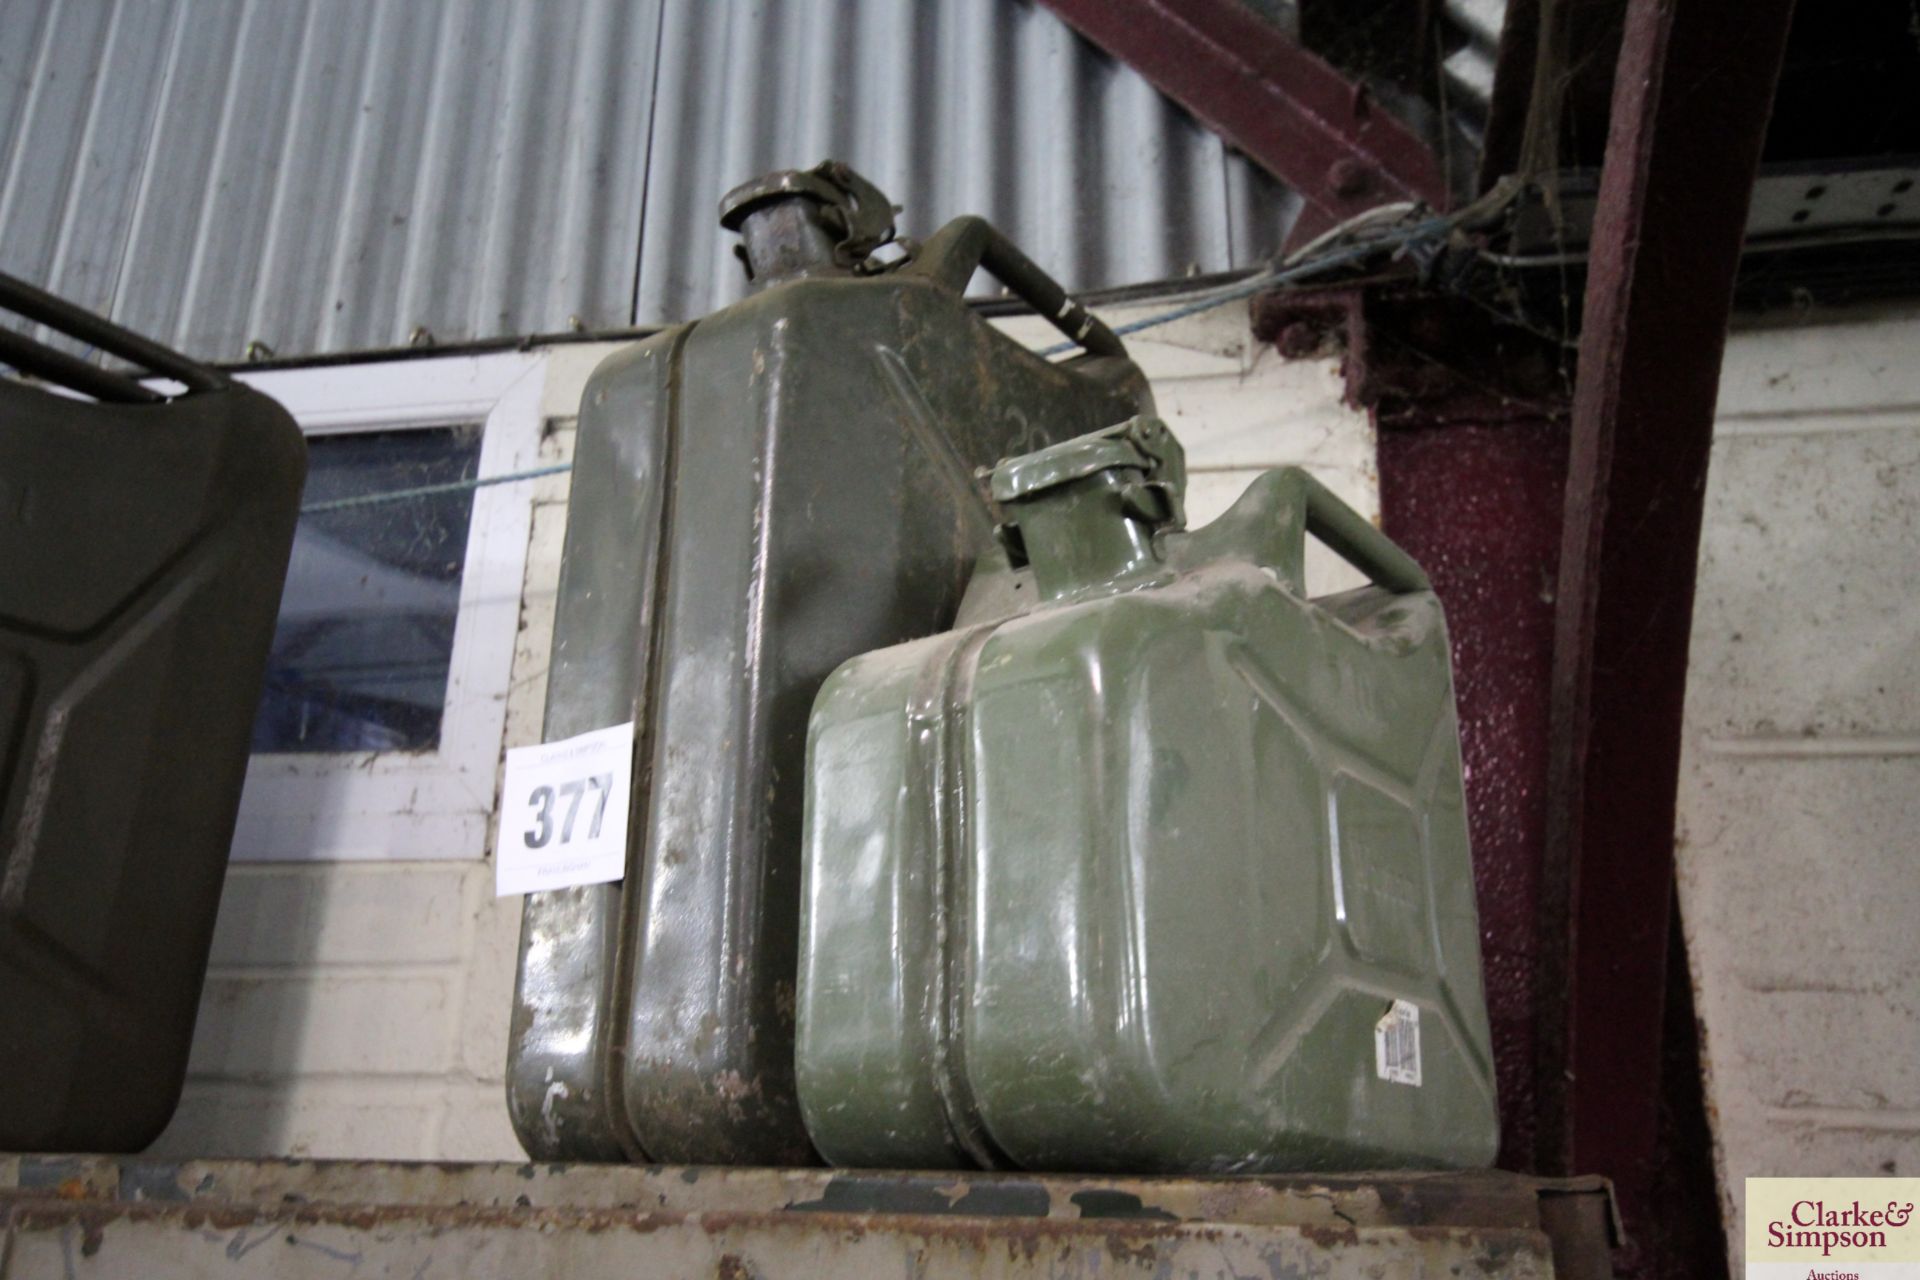 20L Jerry can and 10L Jerry can.